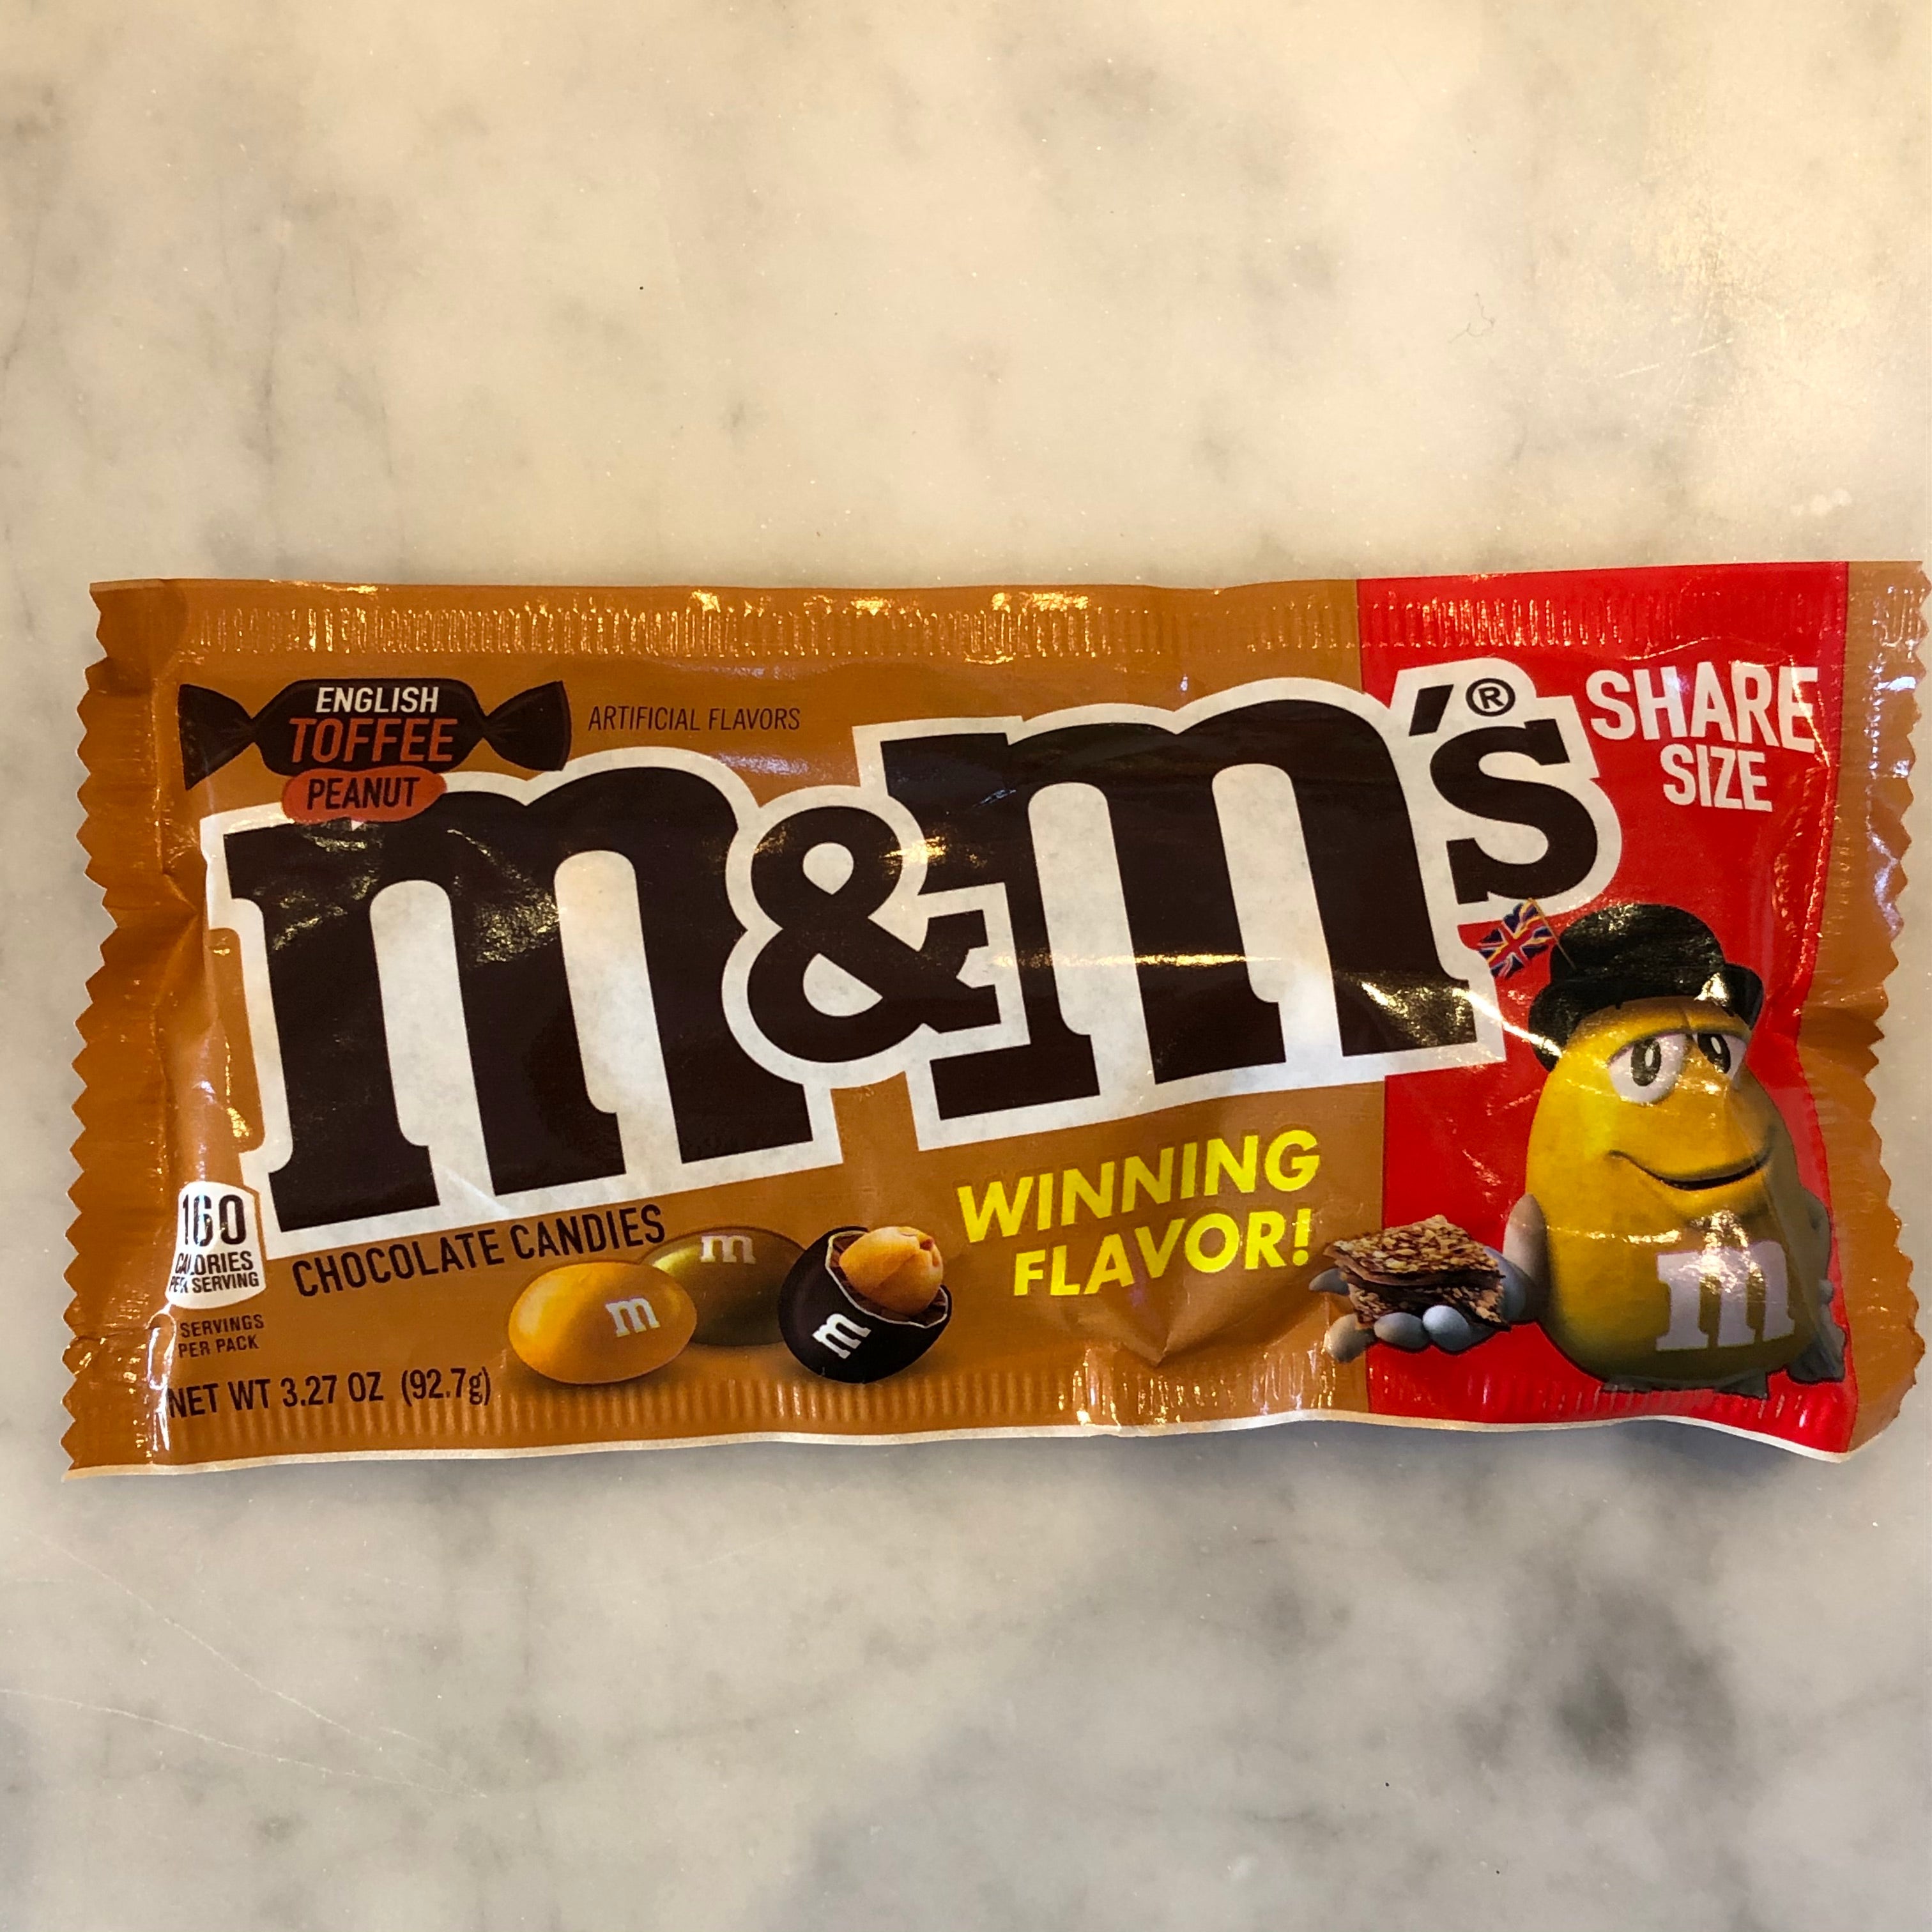 Nutrition & Ingredients for Toffee Peanut M&M's